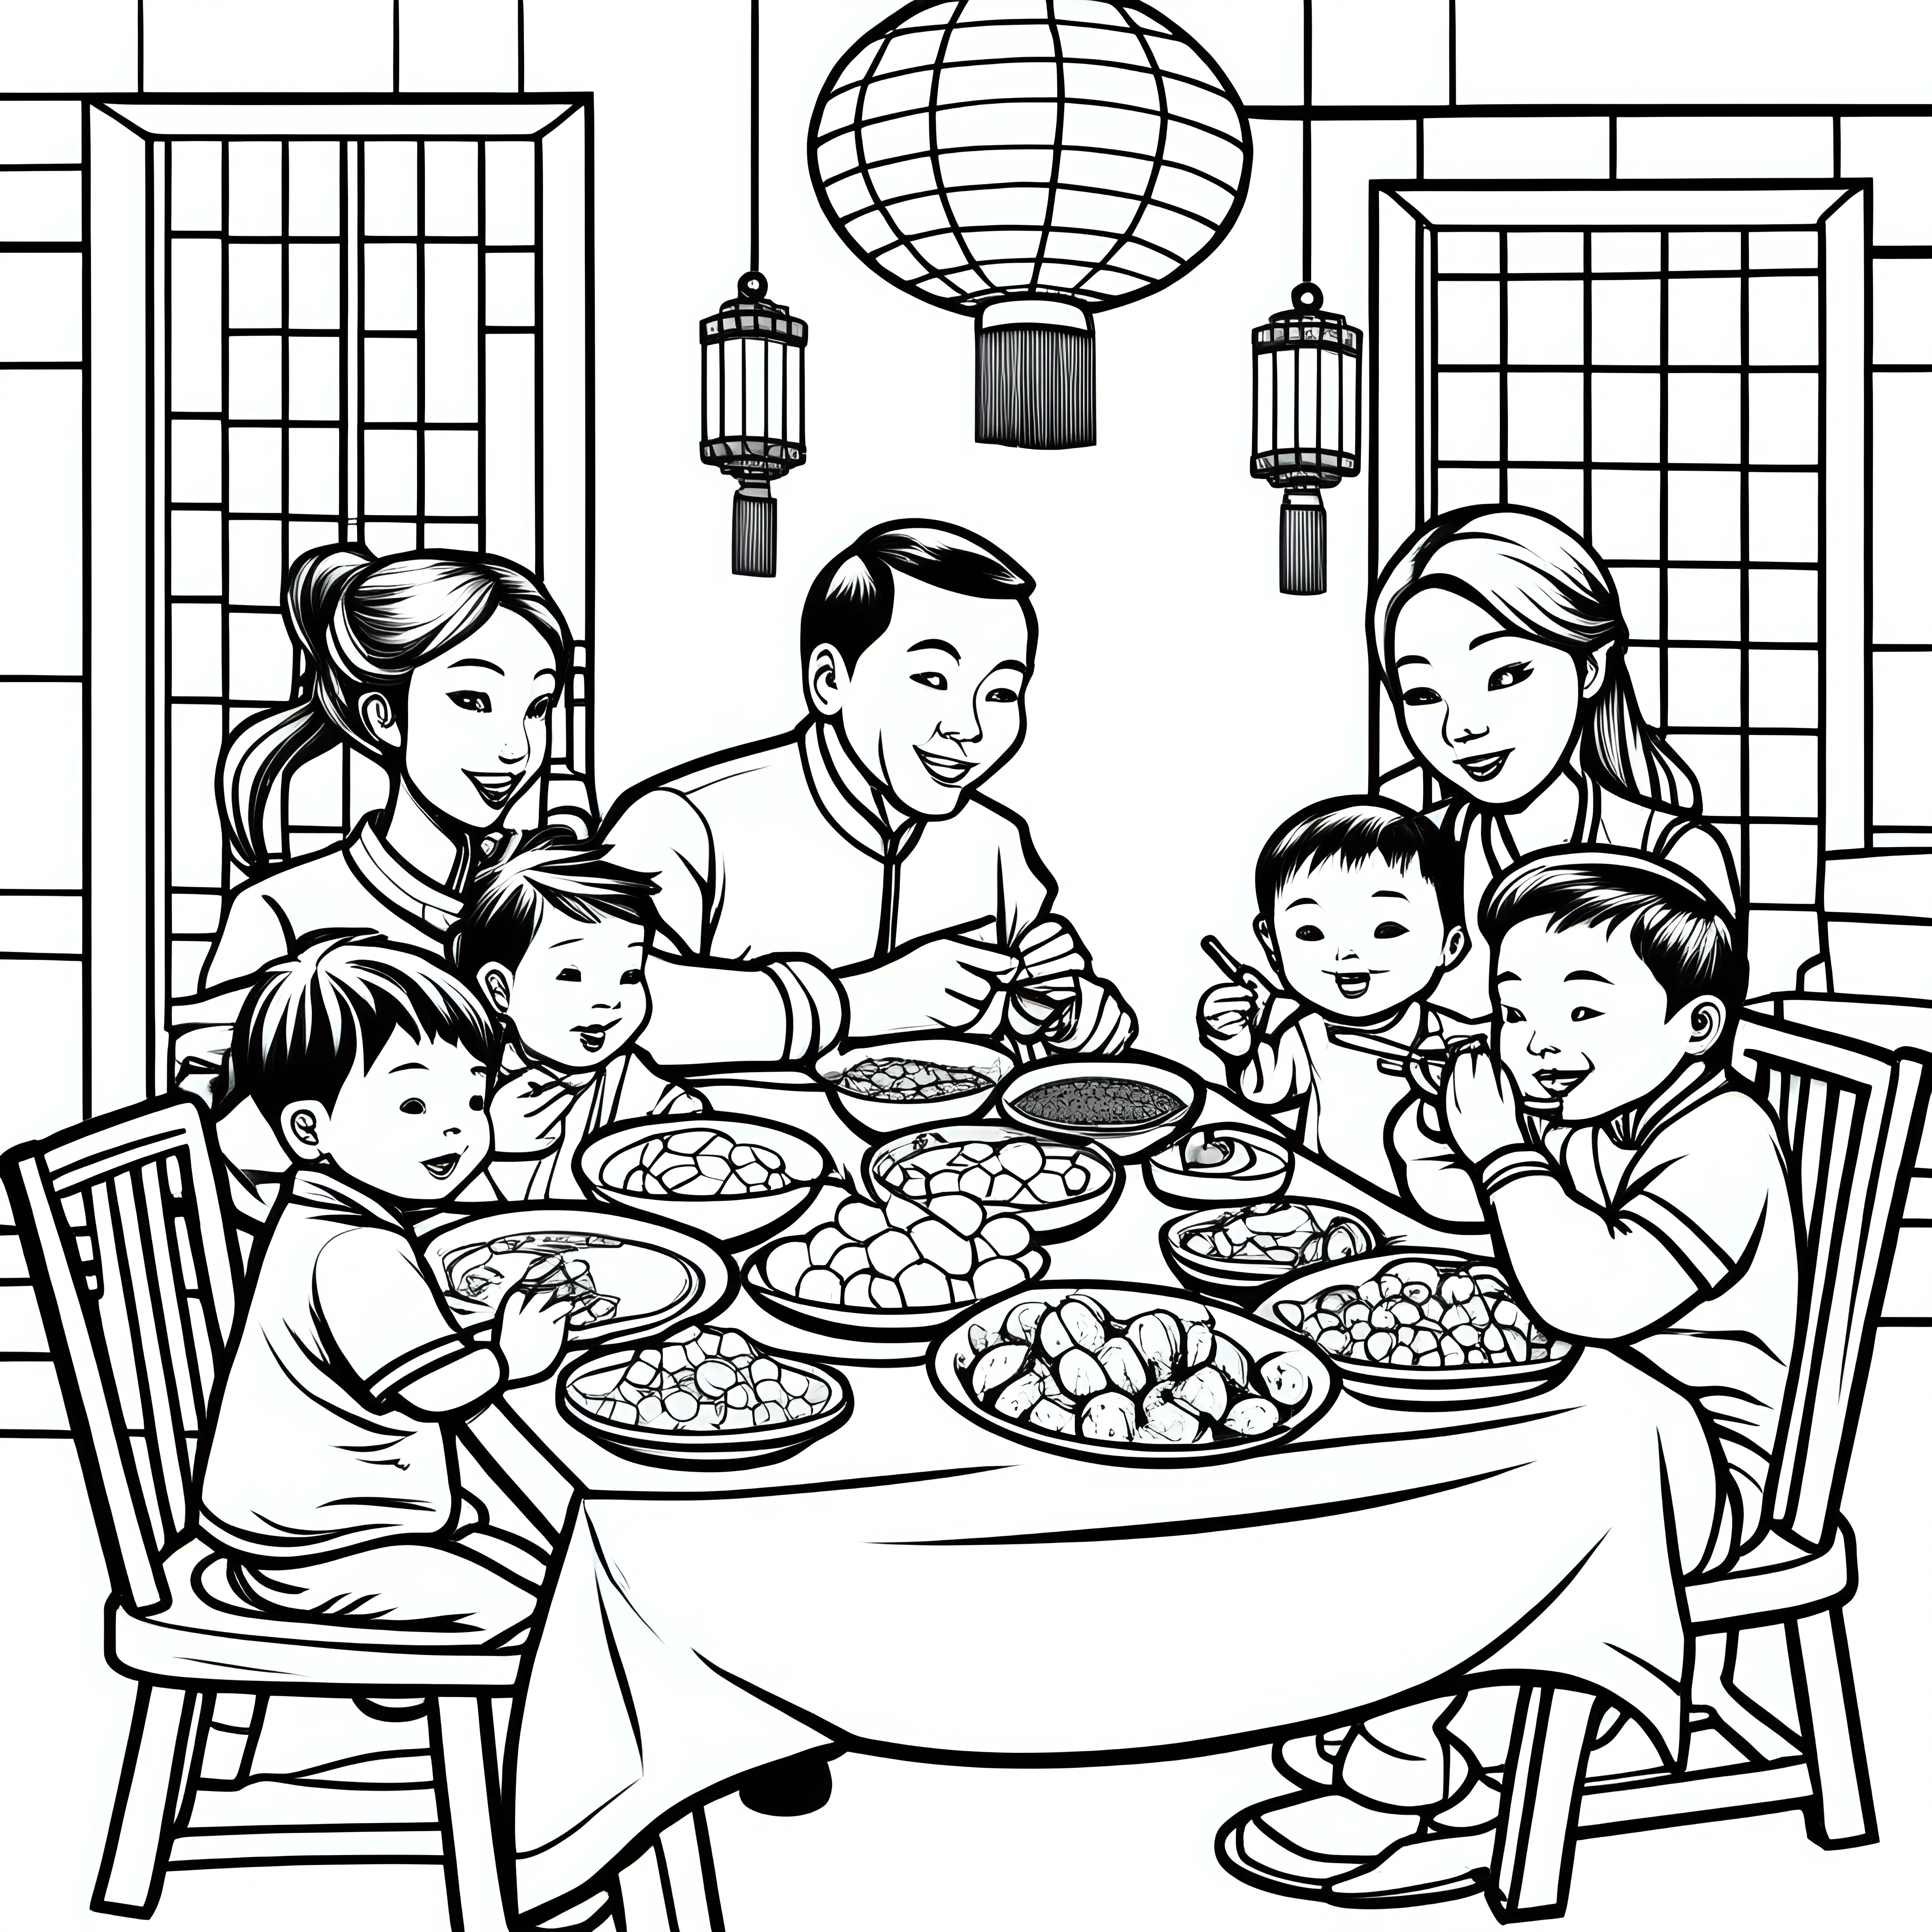 Chinese New Year Cartoon Coloring Page for Kids Family Dinner